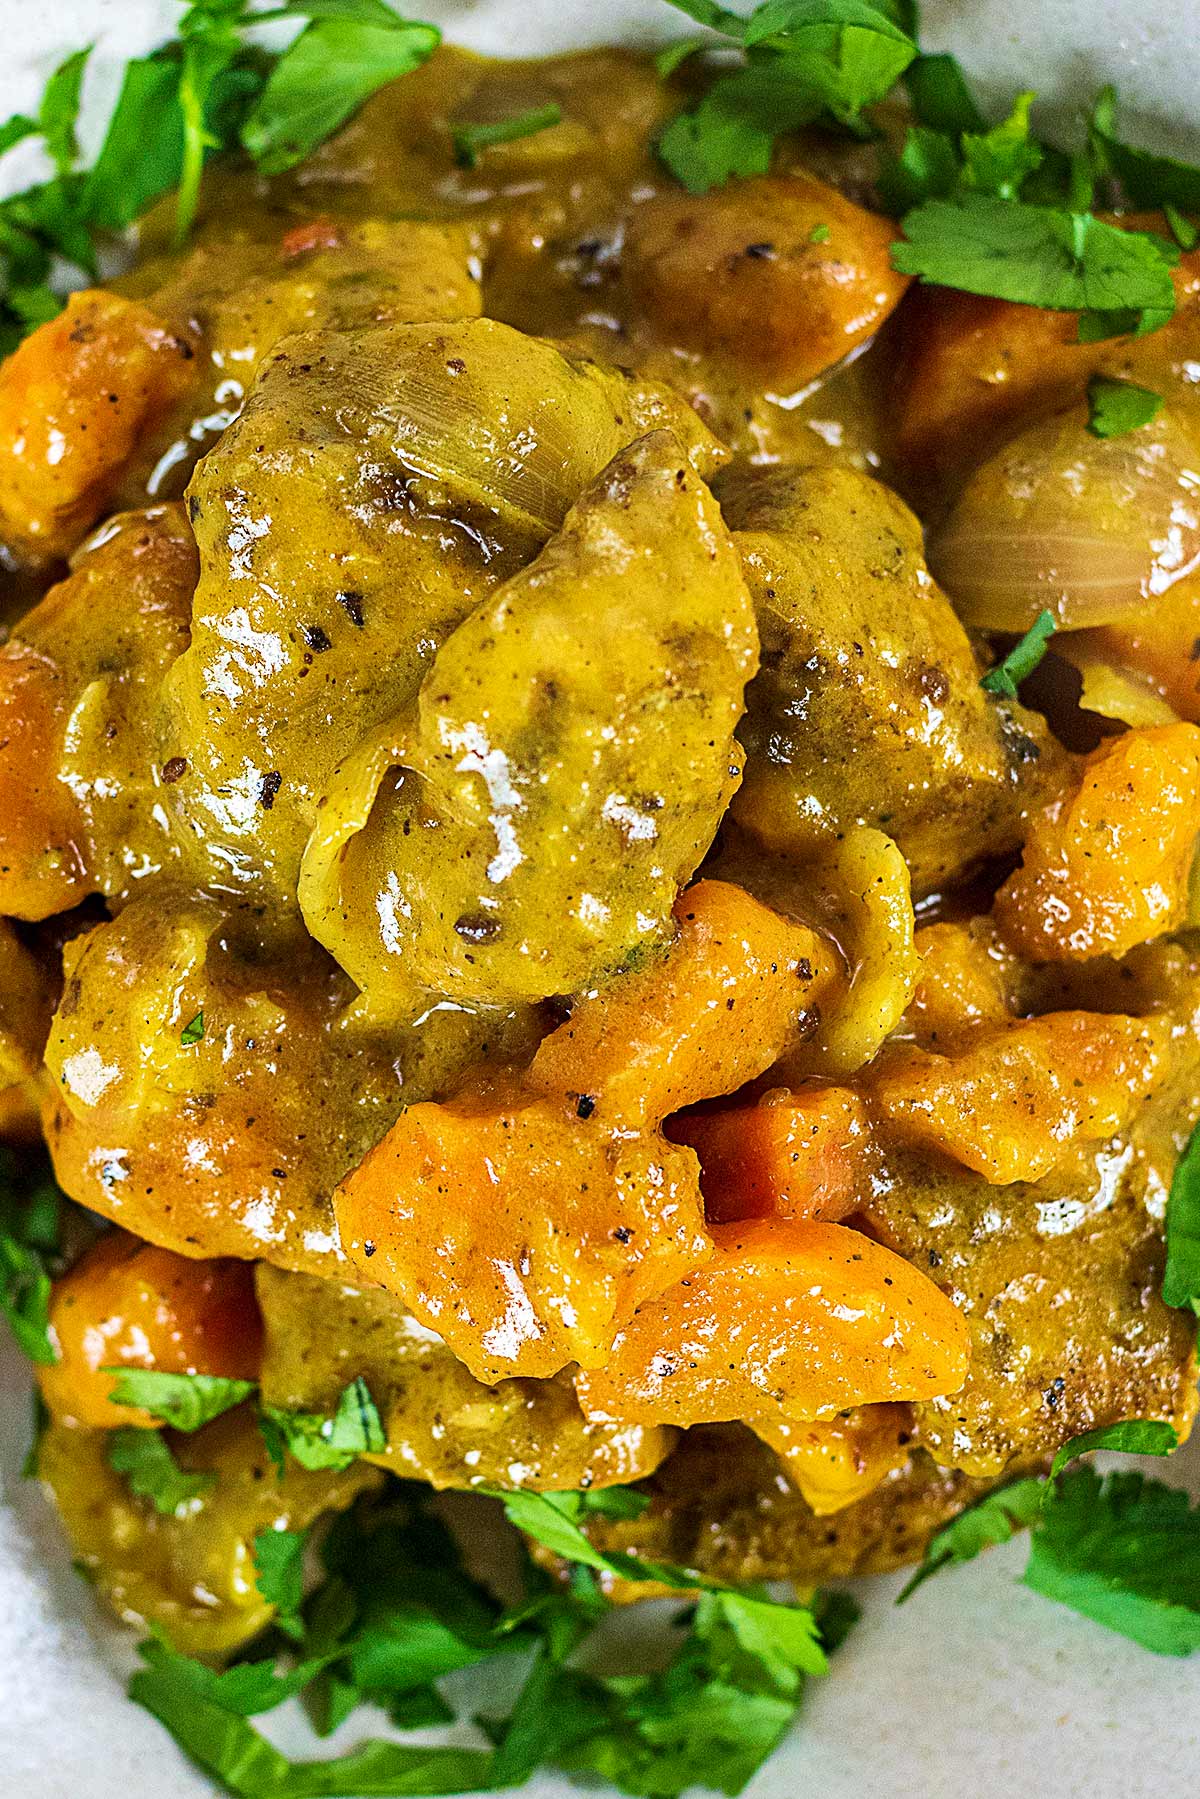 Chunks of chicken, sweet potato and carrot in a curry sauce.